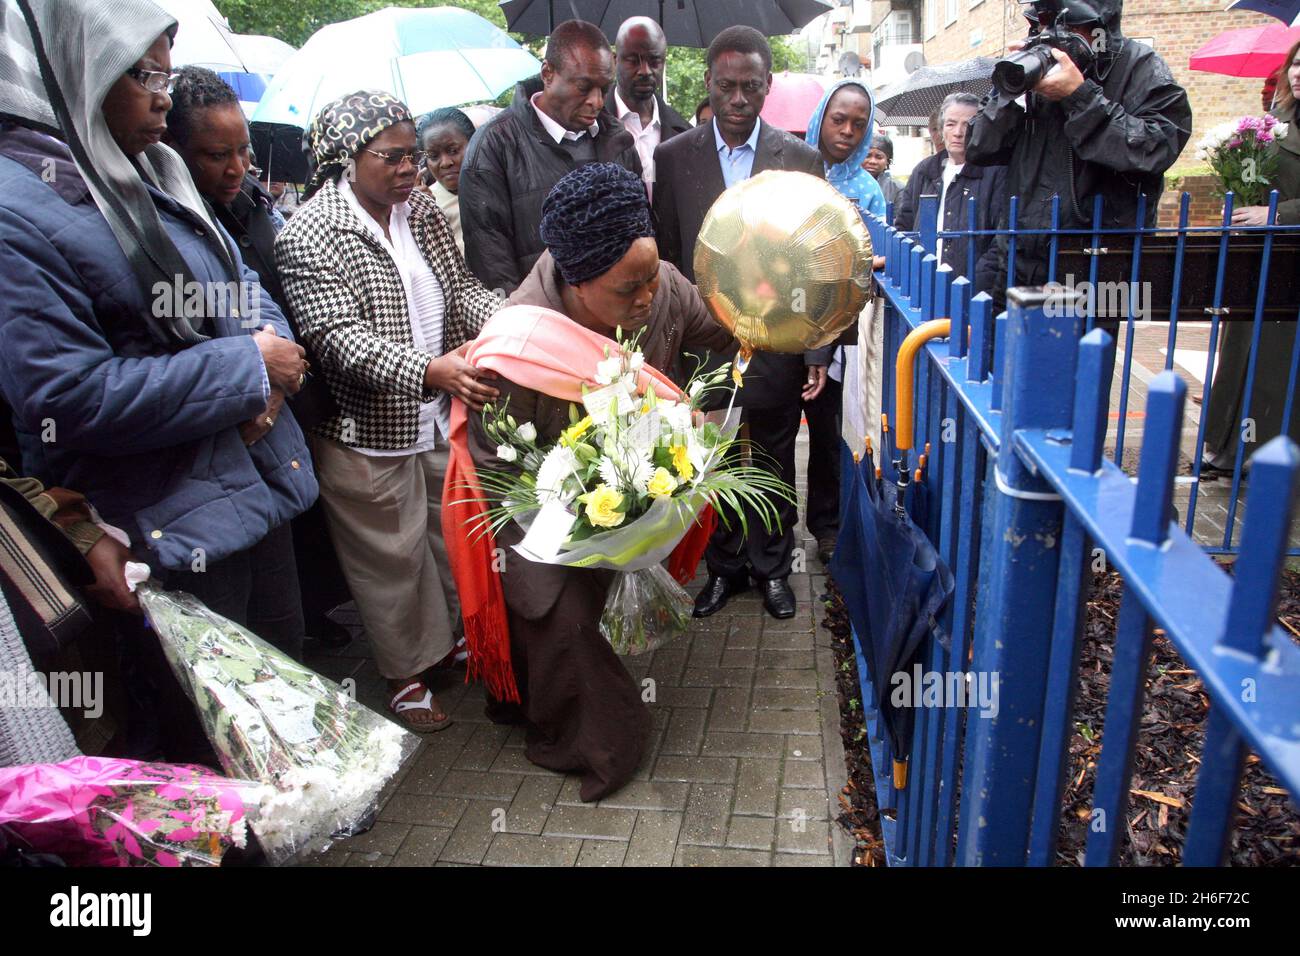 The mother and family of 14 year old murder victim David Idowu laid flowers at the scene where he died in Walworth, South London. Stock Photo